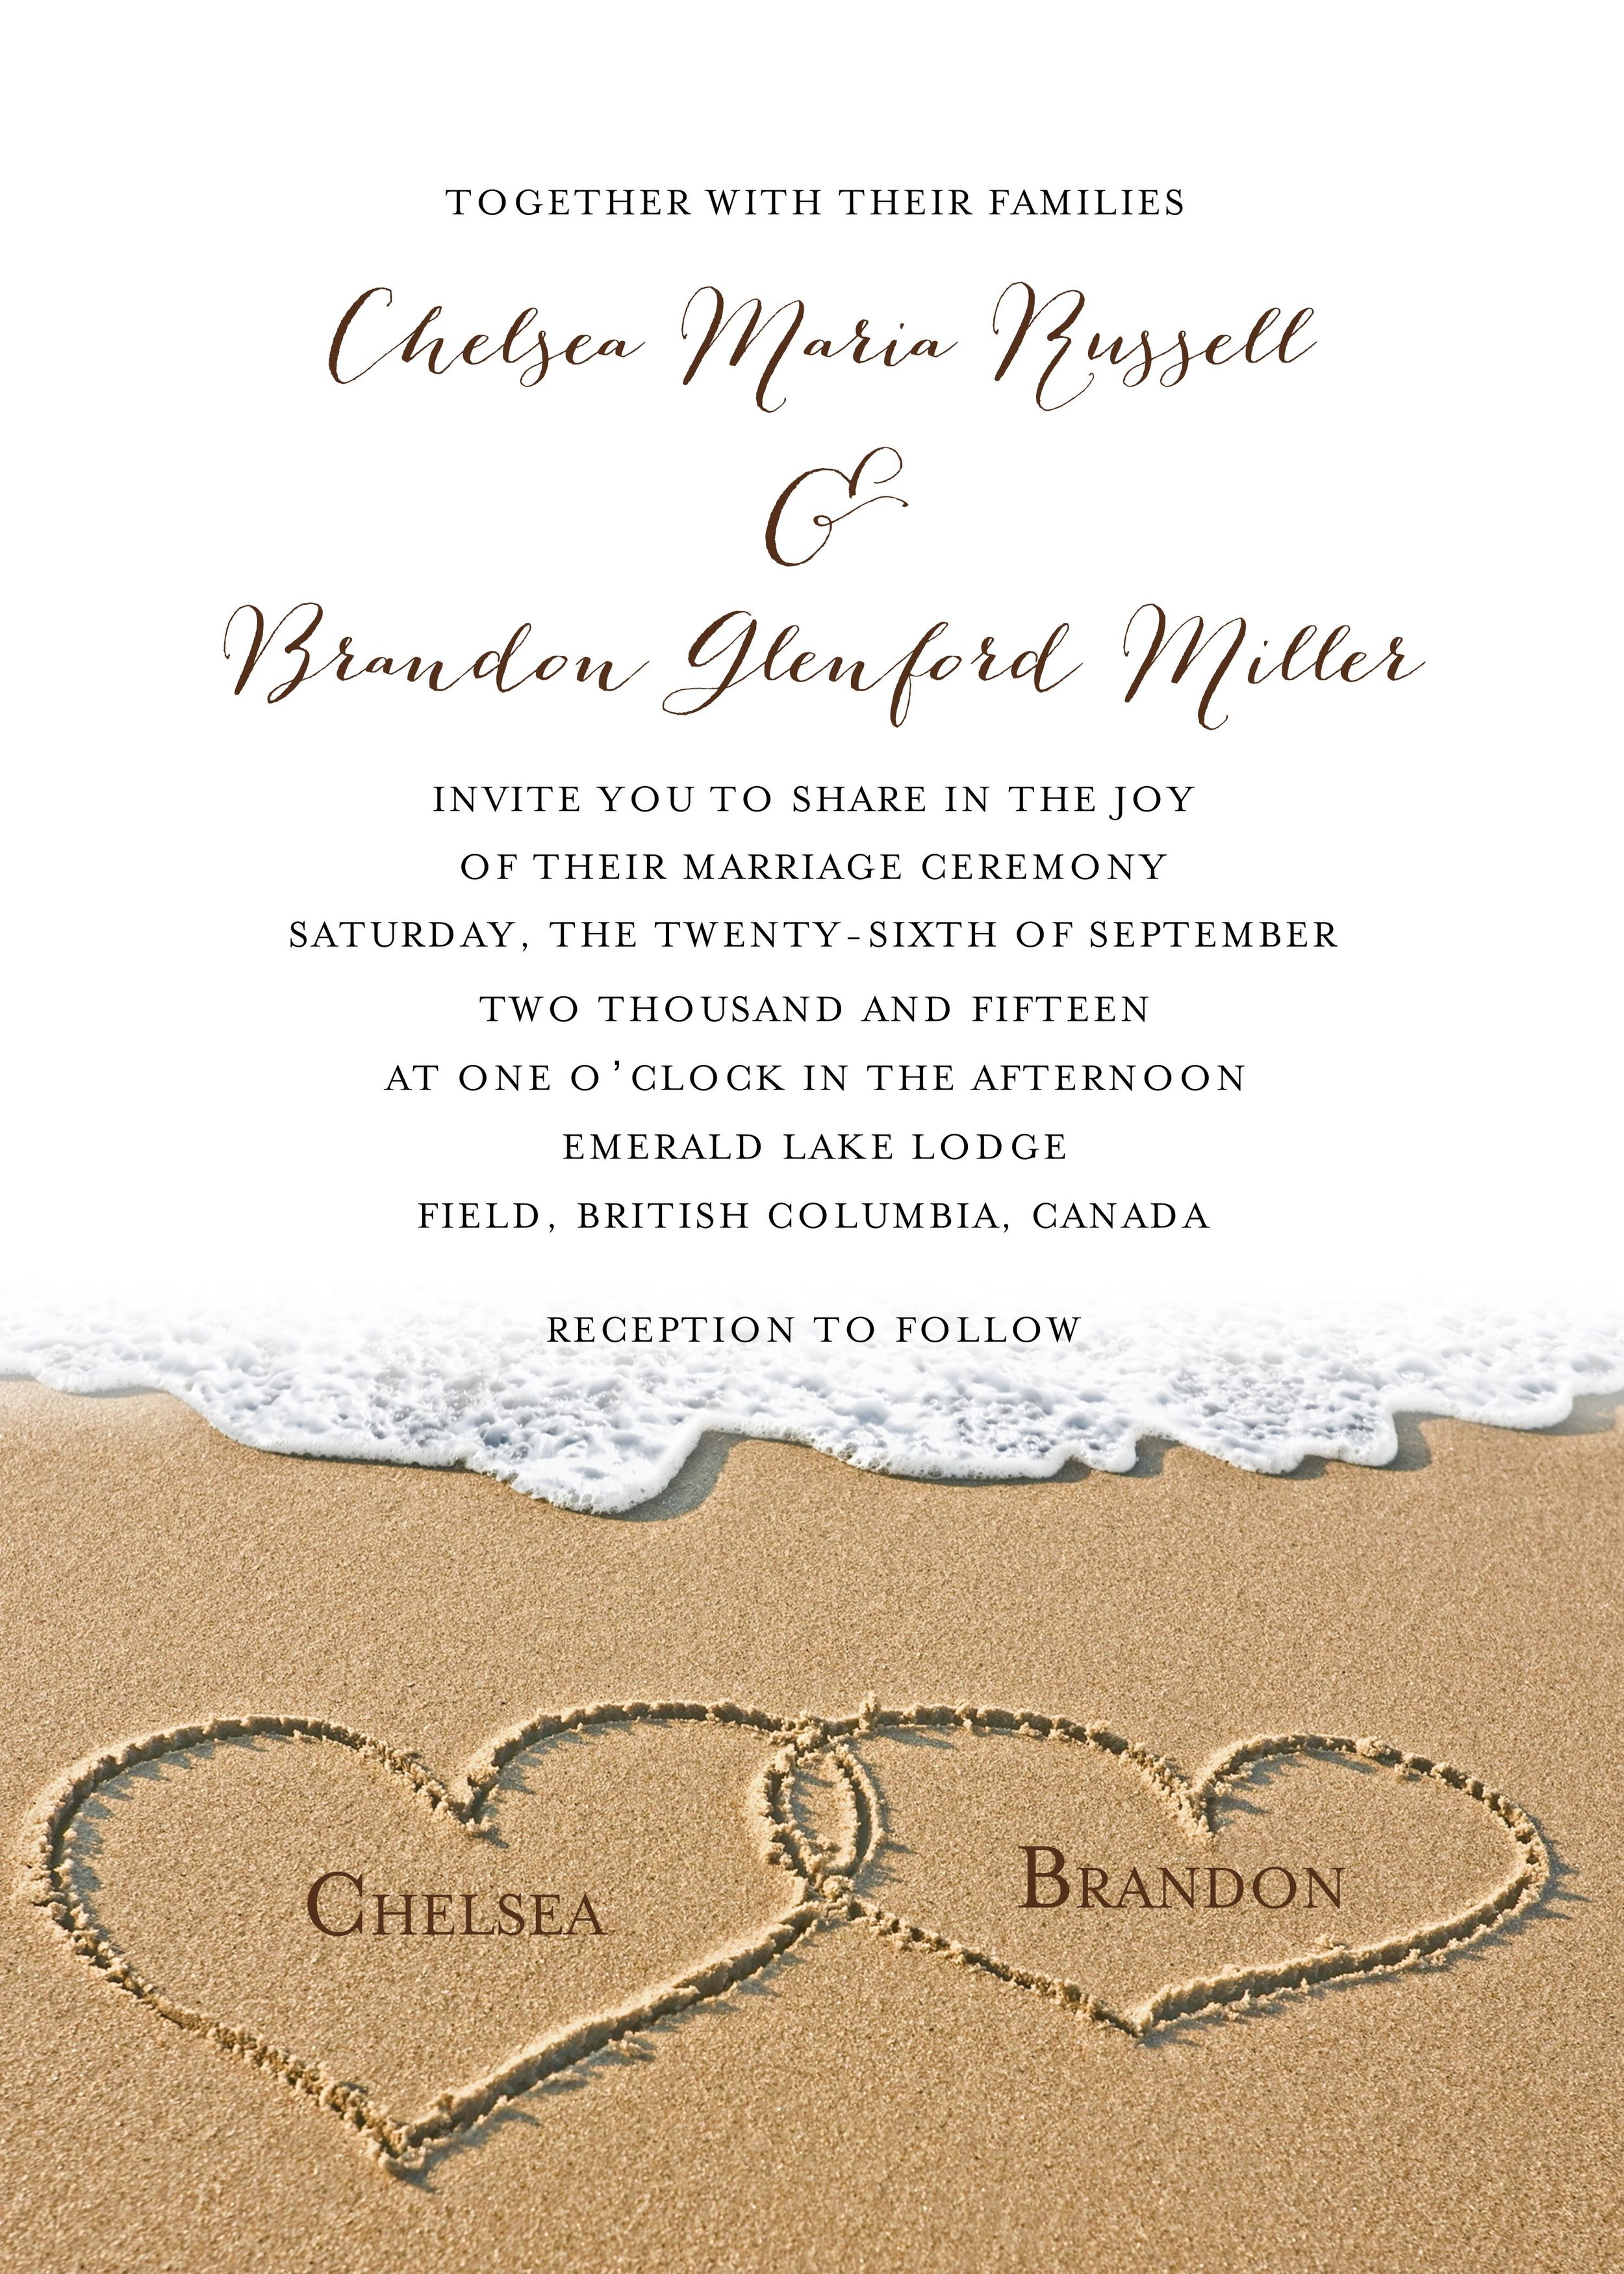 env H0031 Heart in the Sand Beach Wedding Evening Day Reception Invites x 12 